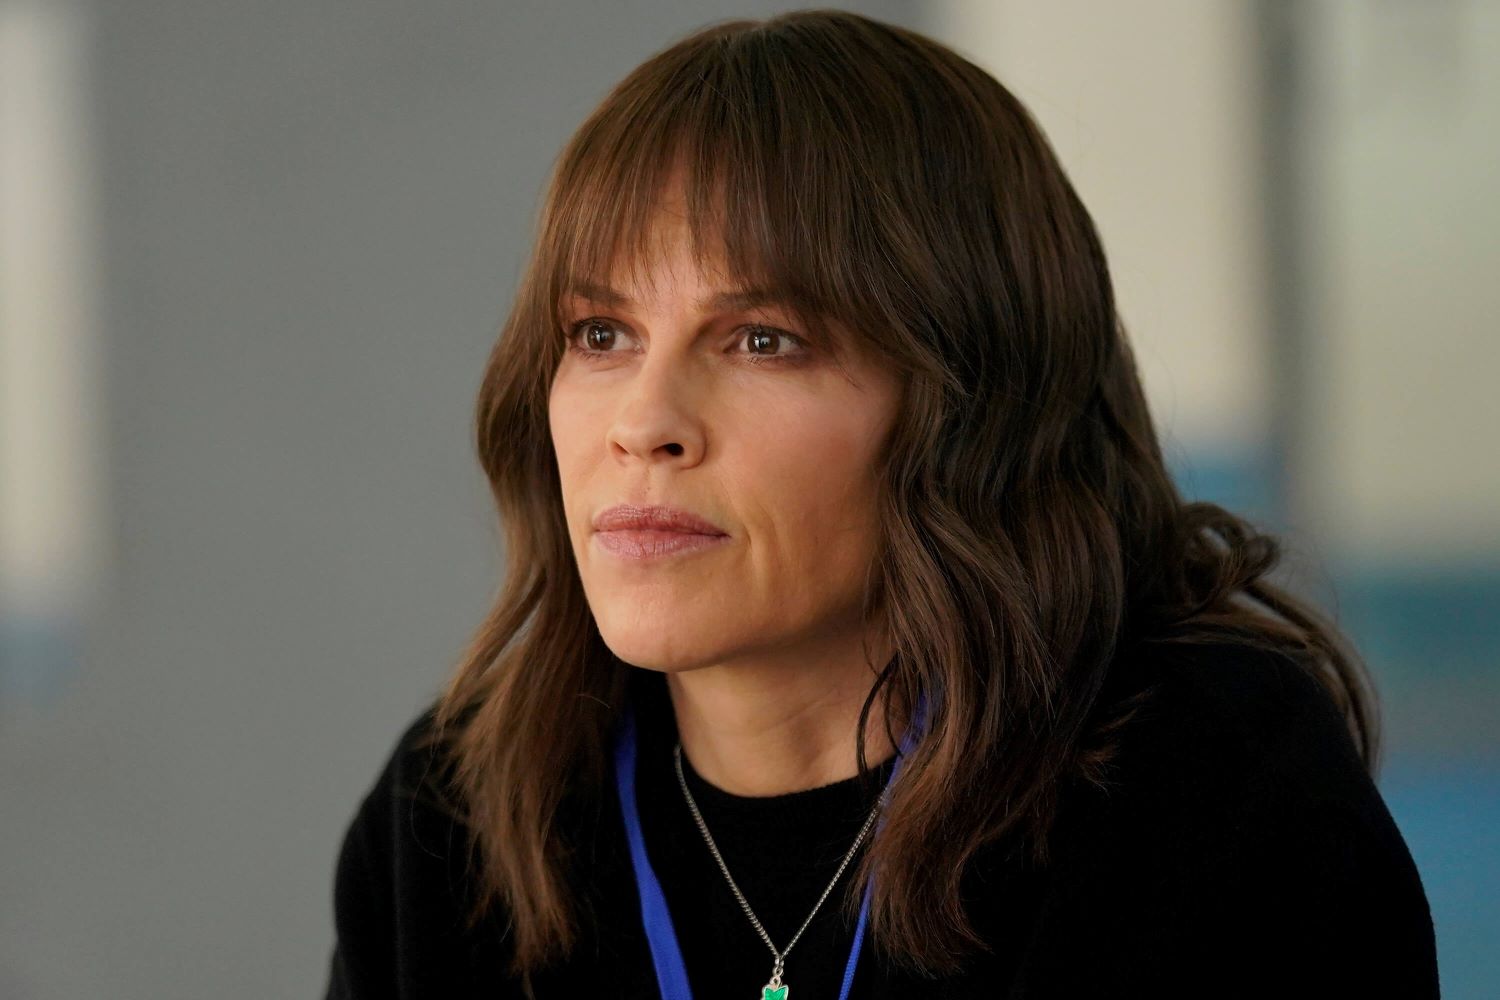 Hilary Swank as Eileen Fitzgerald in 'Alaska Daily' Episode 8, 'Rush to Judgement,' on ABC.